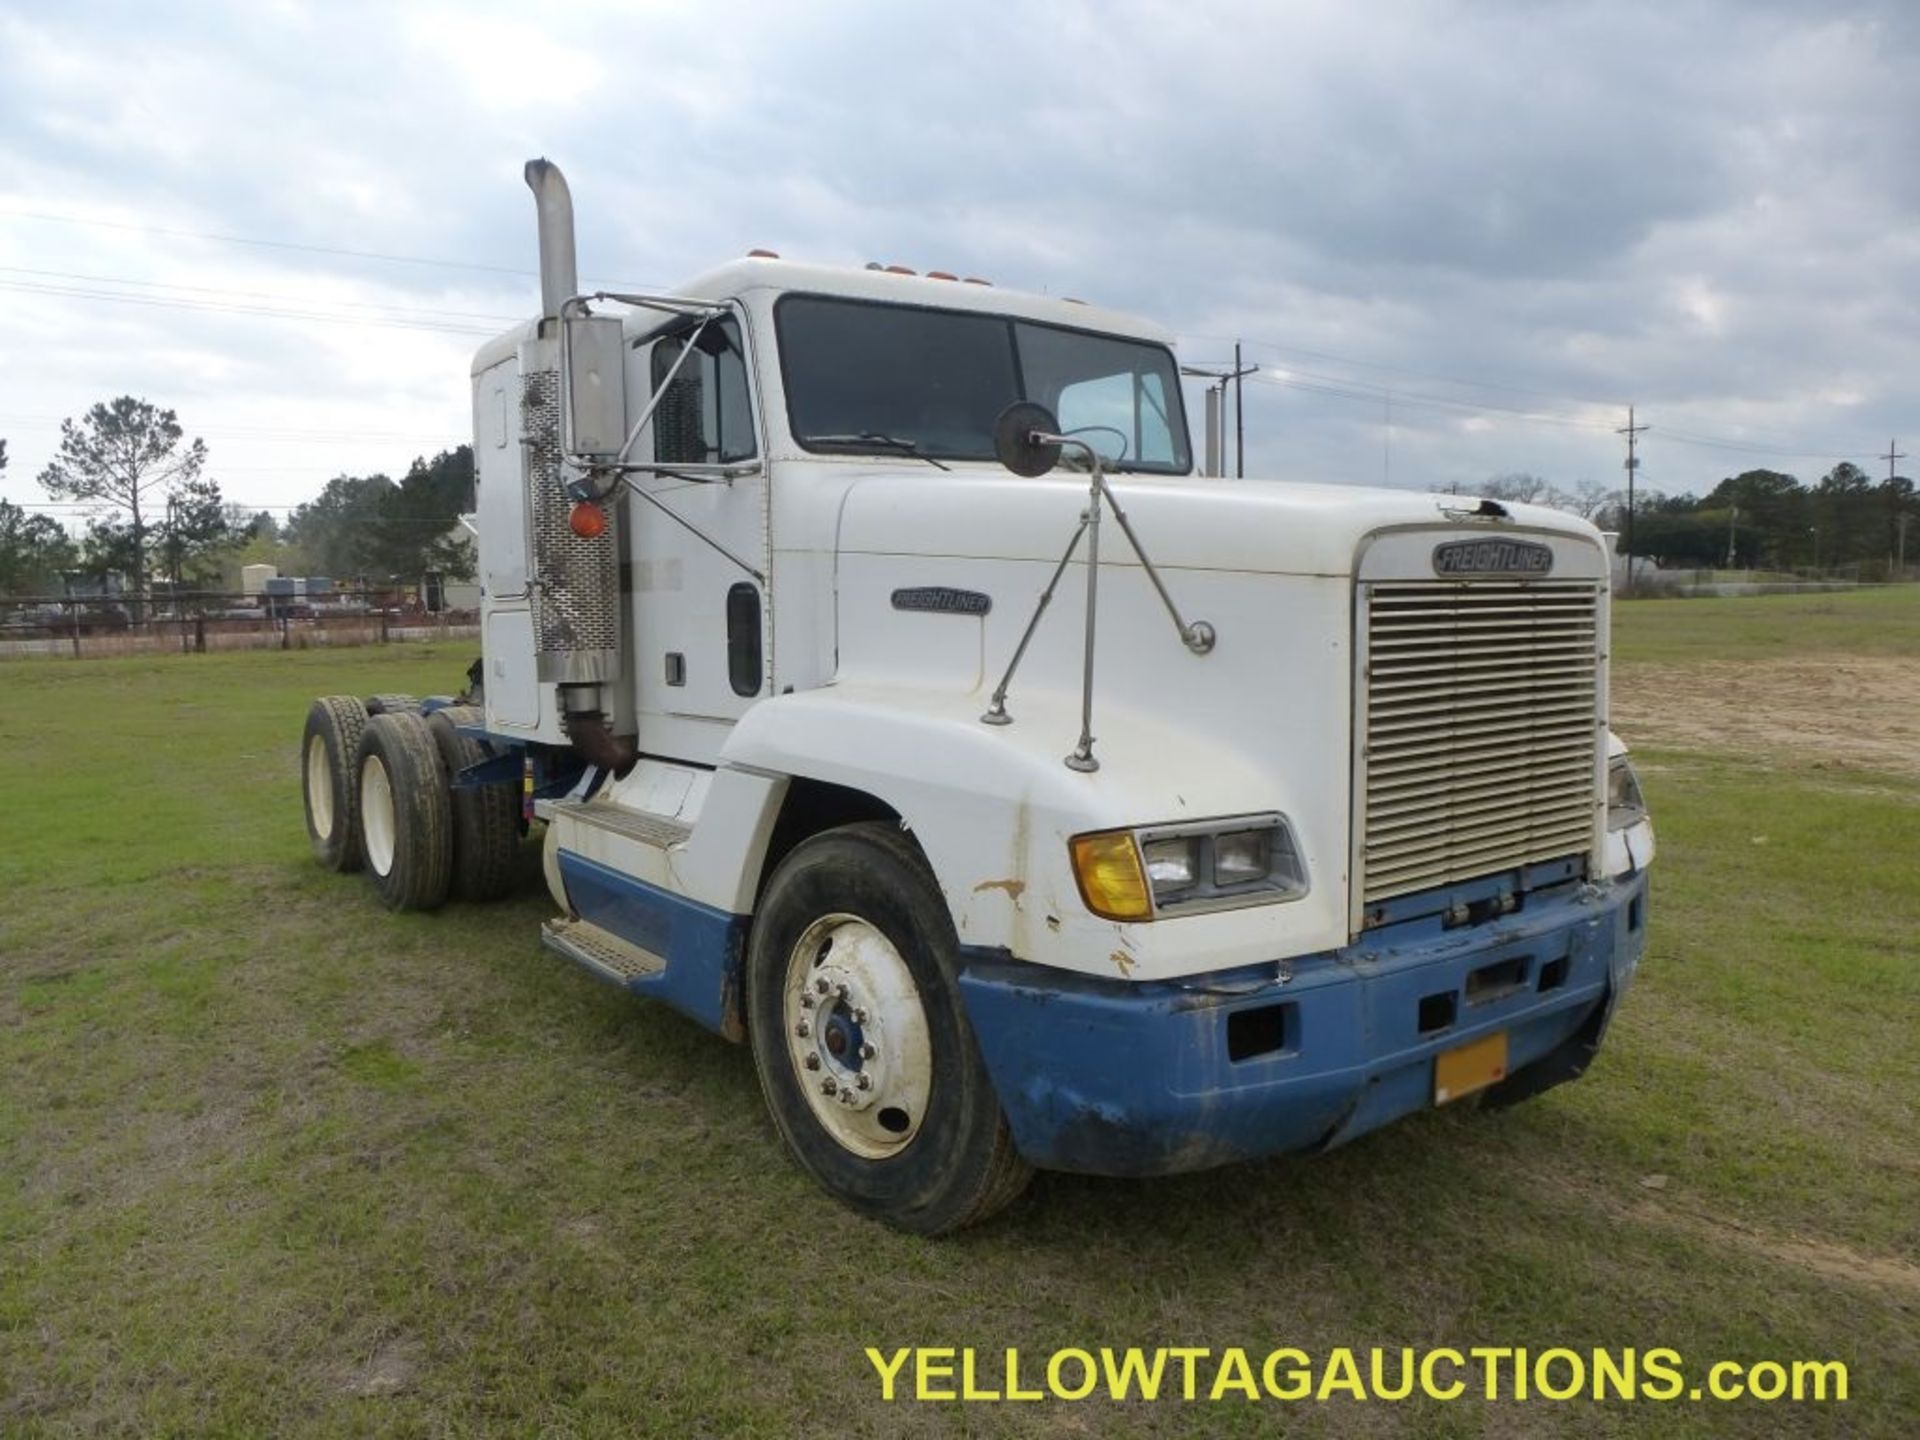 1989 Freightliner FLD 120 Truck Tractor|VIN #1FUYDCYBXKP338622;|Titled, Non-Taxable||Tag: 849 - Bild 2 aus 21